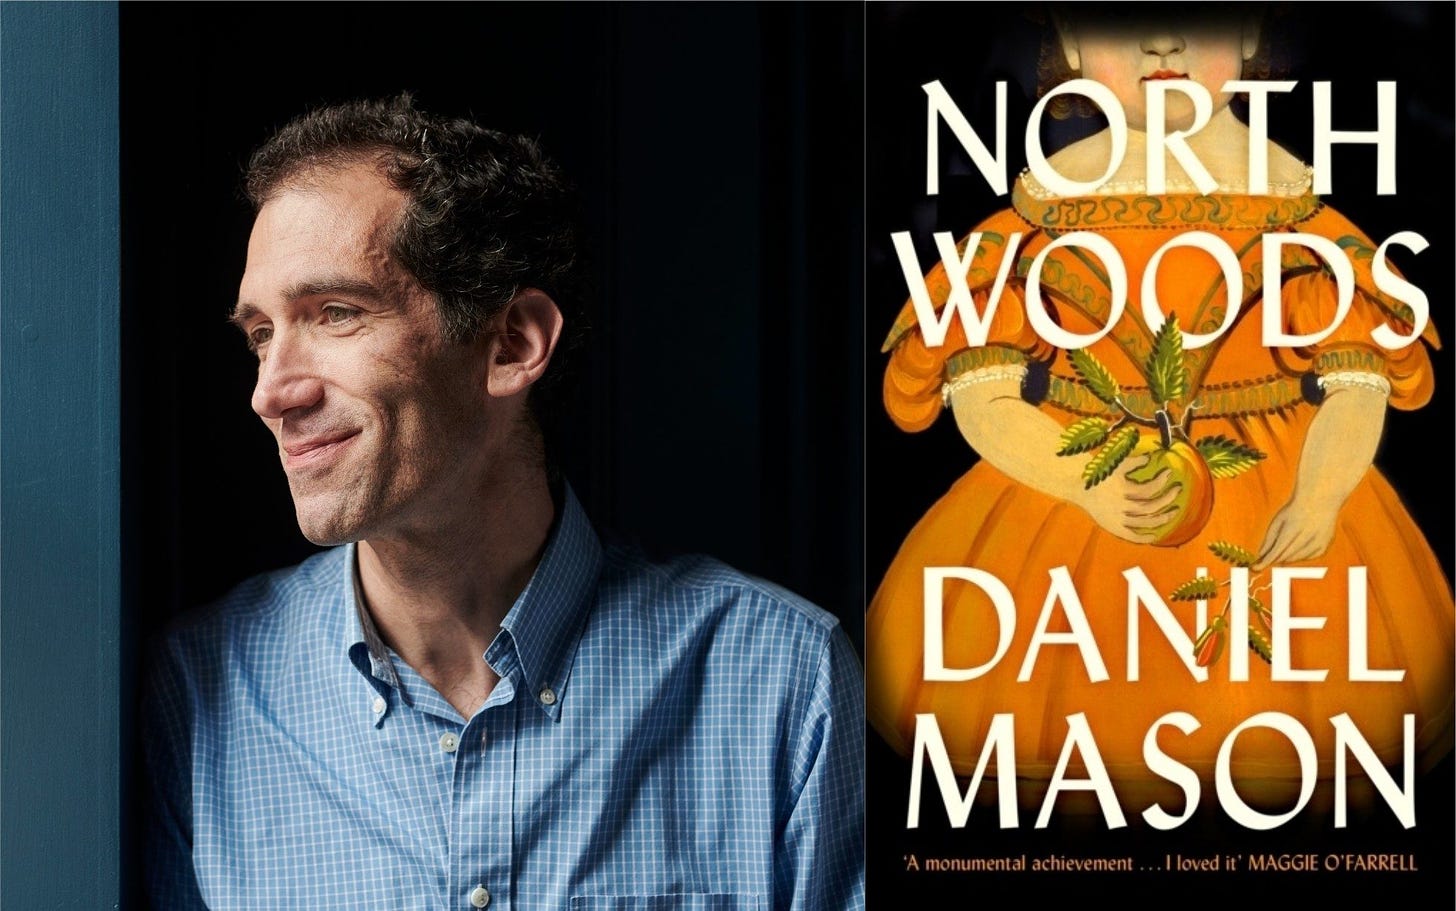 North Woods by Daniel Mason: an all-American epic